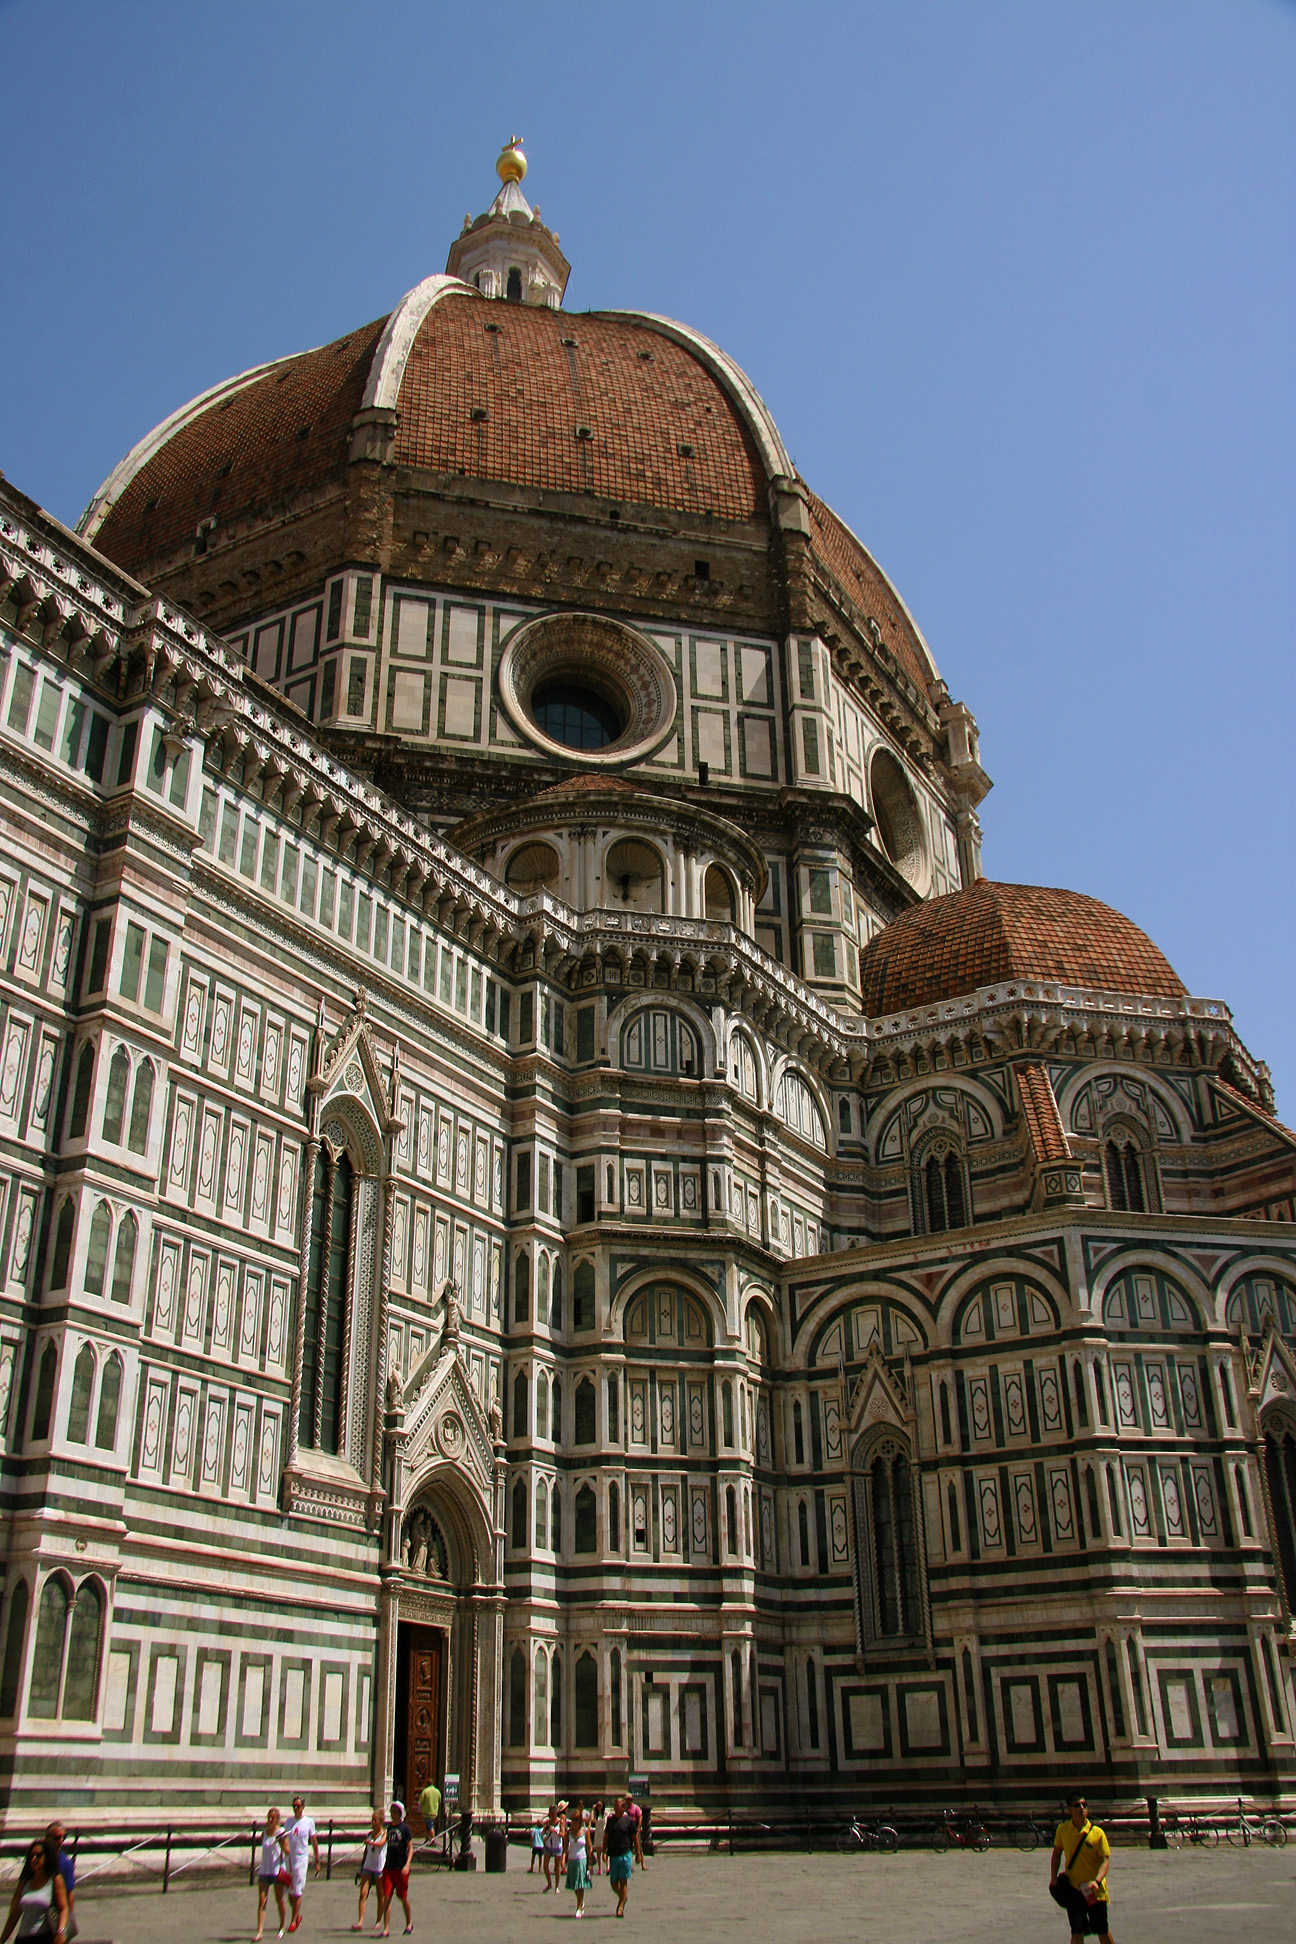 Part of the Duomo or Santa Maria del Fiore, with the dome by Brunelleschi.